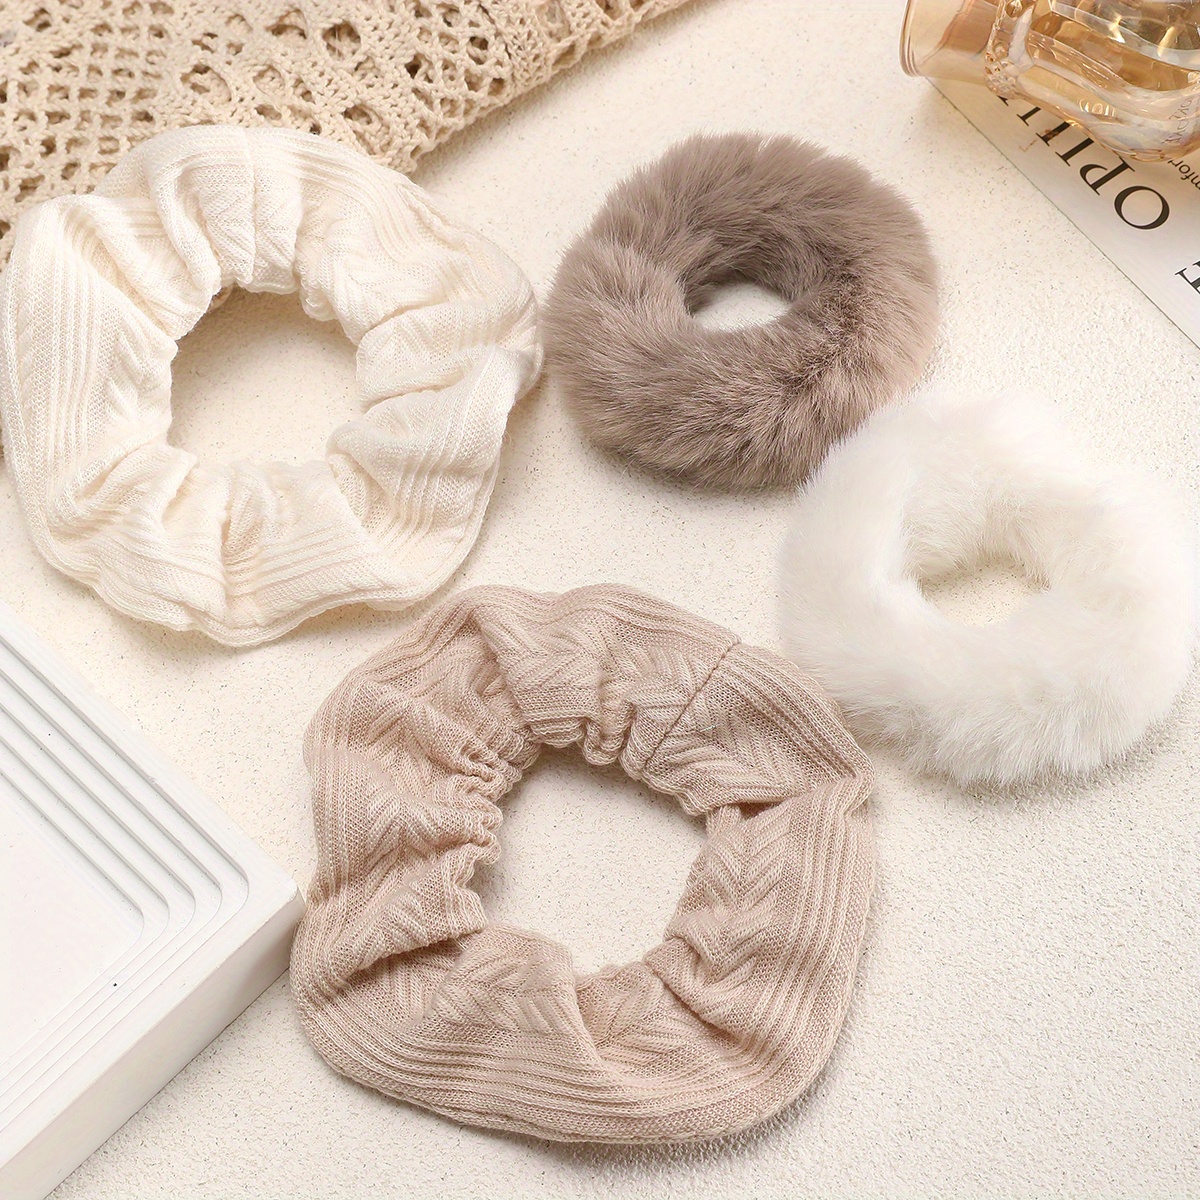 Pcs Trendy Fuzzy Hair Scrunchies Soft Hair Elastic Band For Women Party  Daily Hair Accessories Cute Hair Styling Decoration, Unique Cute  Scrunchies